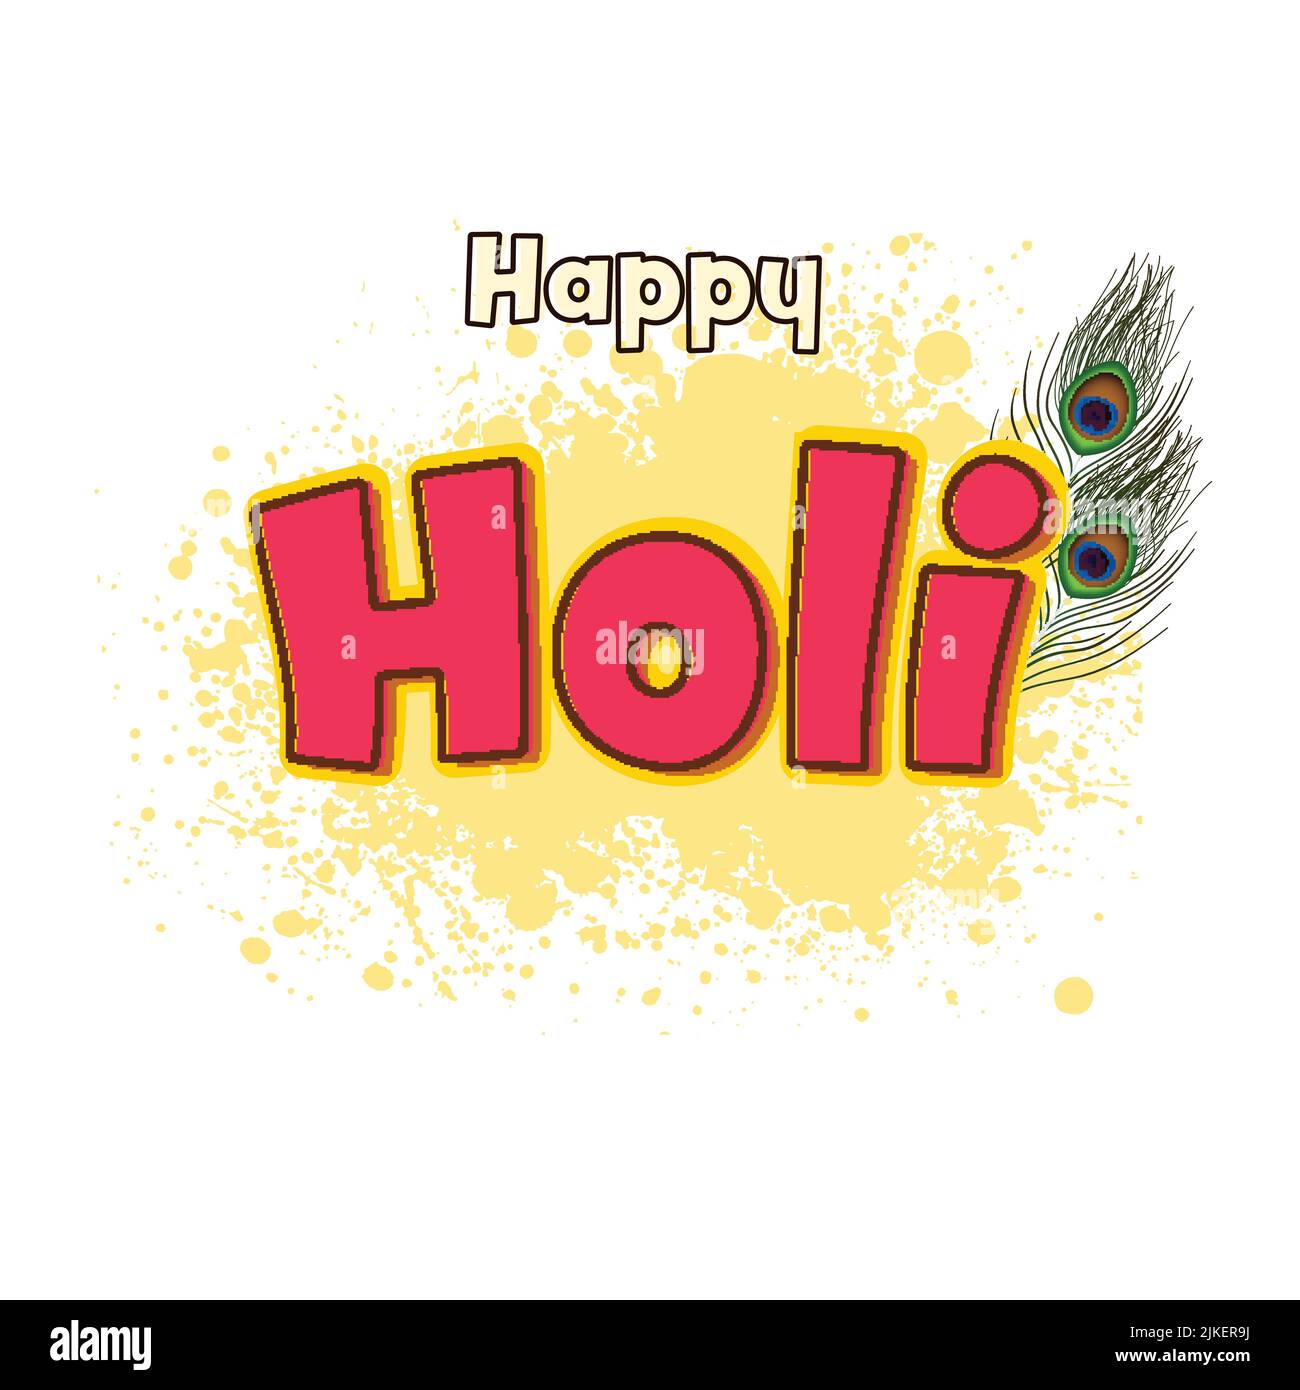 Happy Holi Font With Peacock Feather And Yellow Splatter Effect On ...